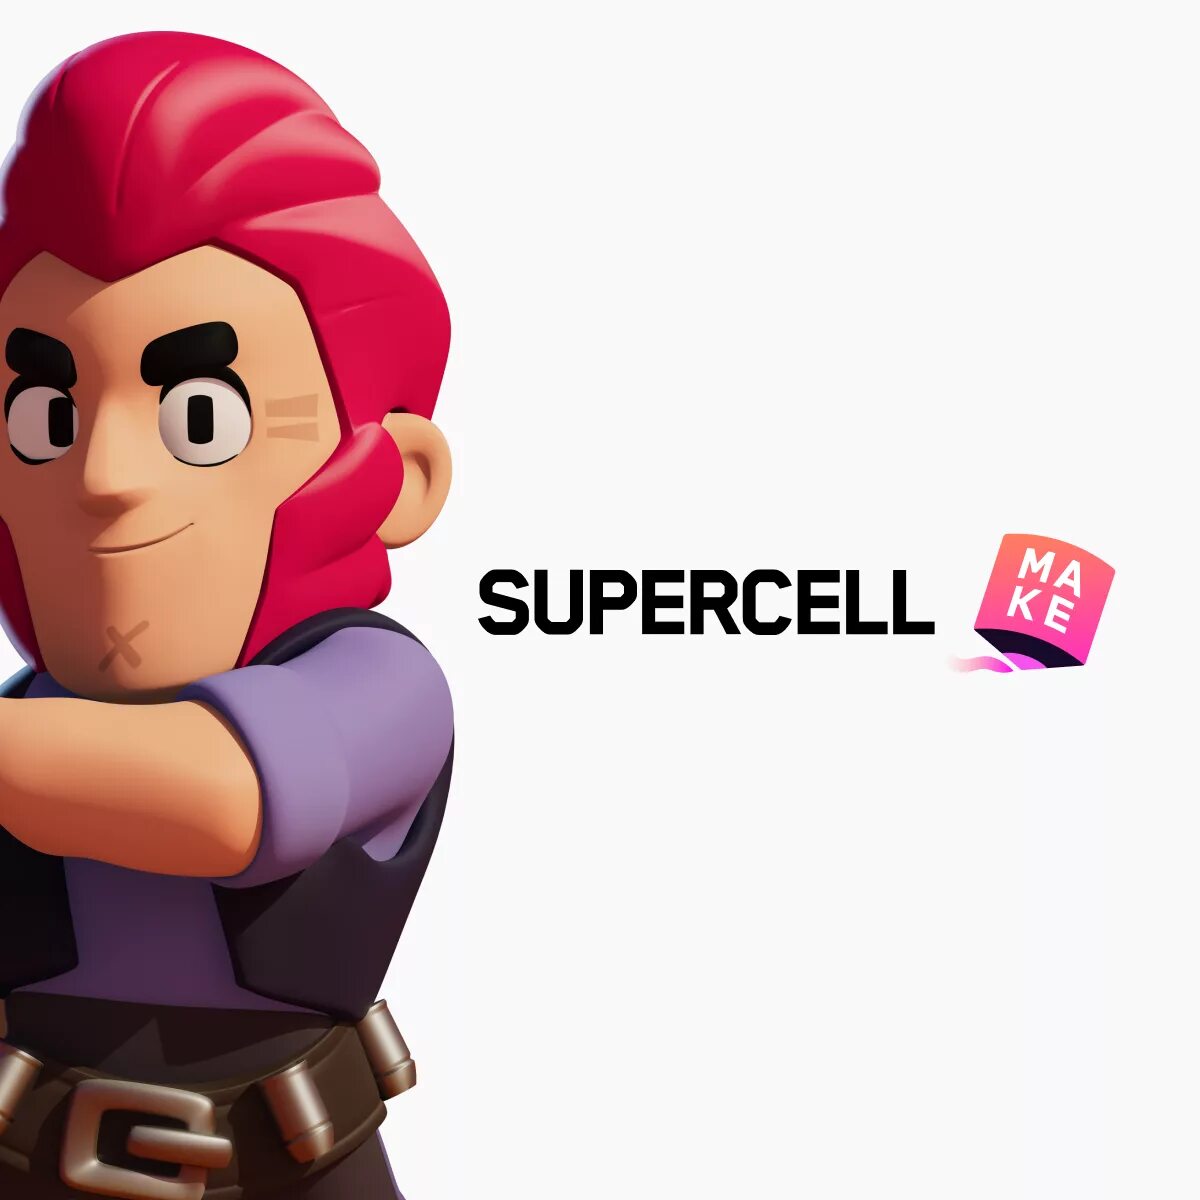 Supersell store. Скины суперсел маке. Суперселл БРАВЛ. Supercell make. Браво старс Supercell make.